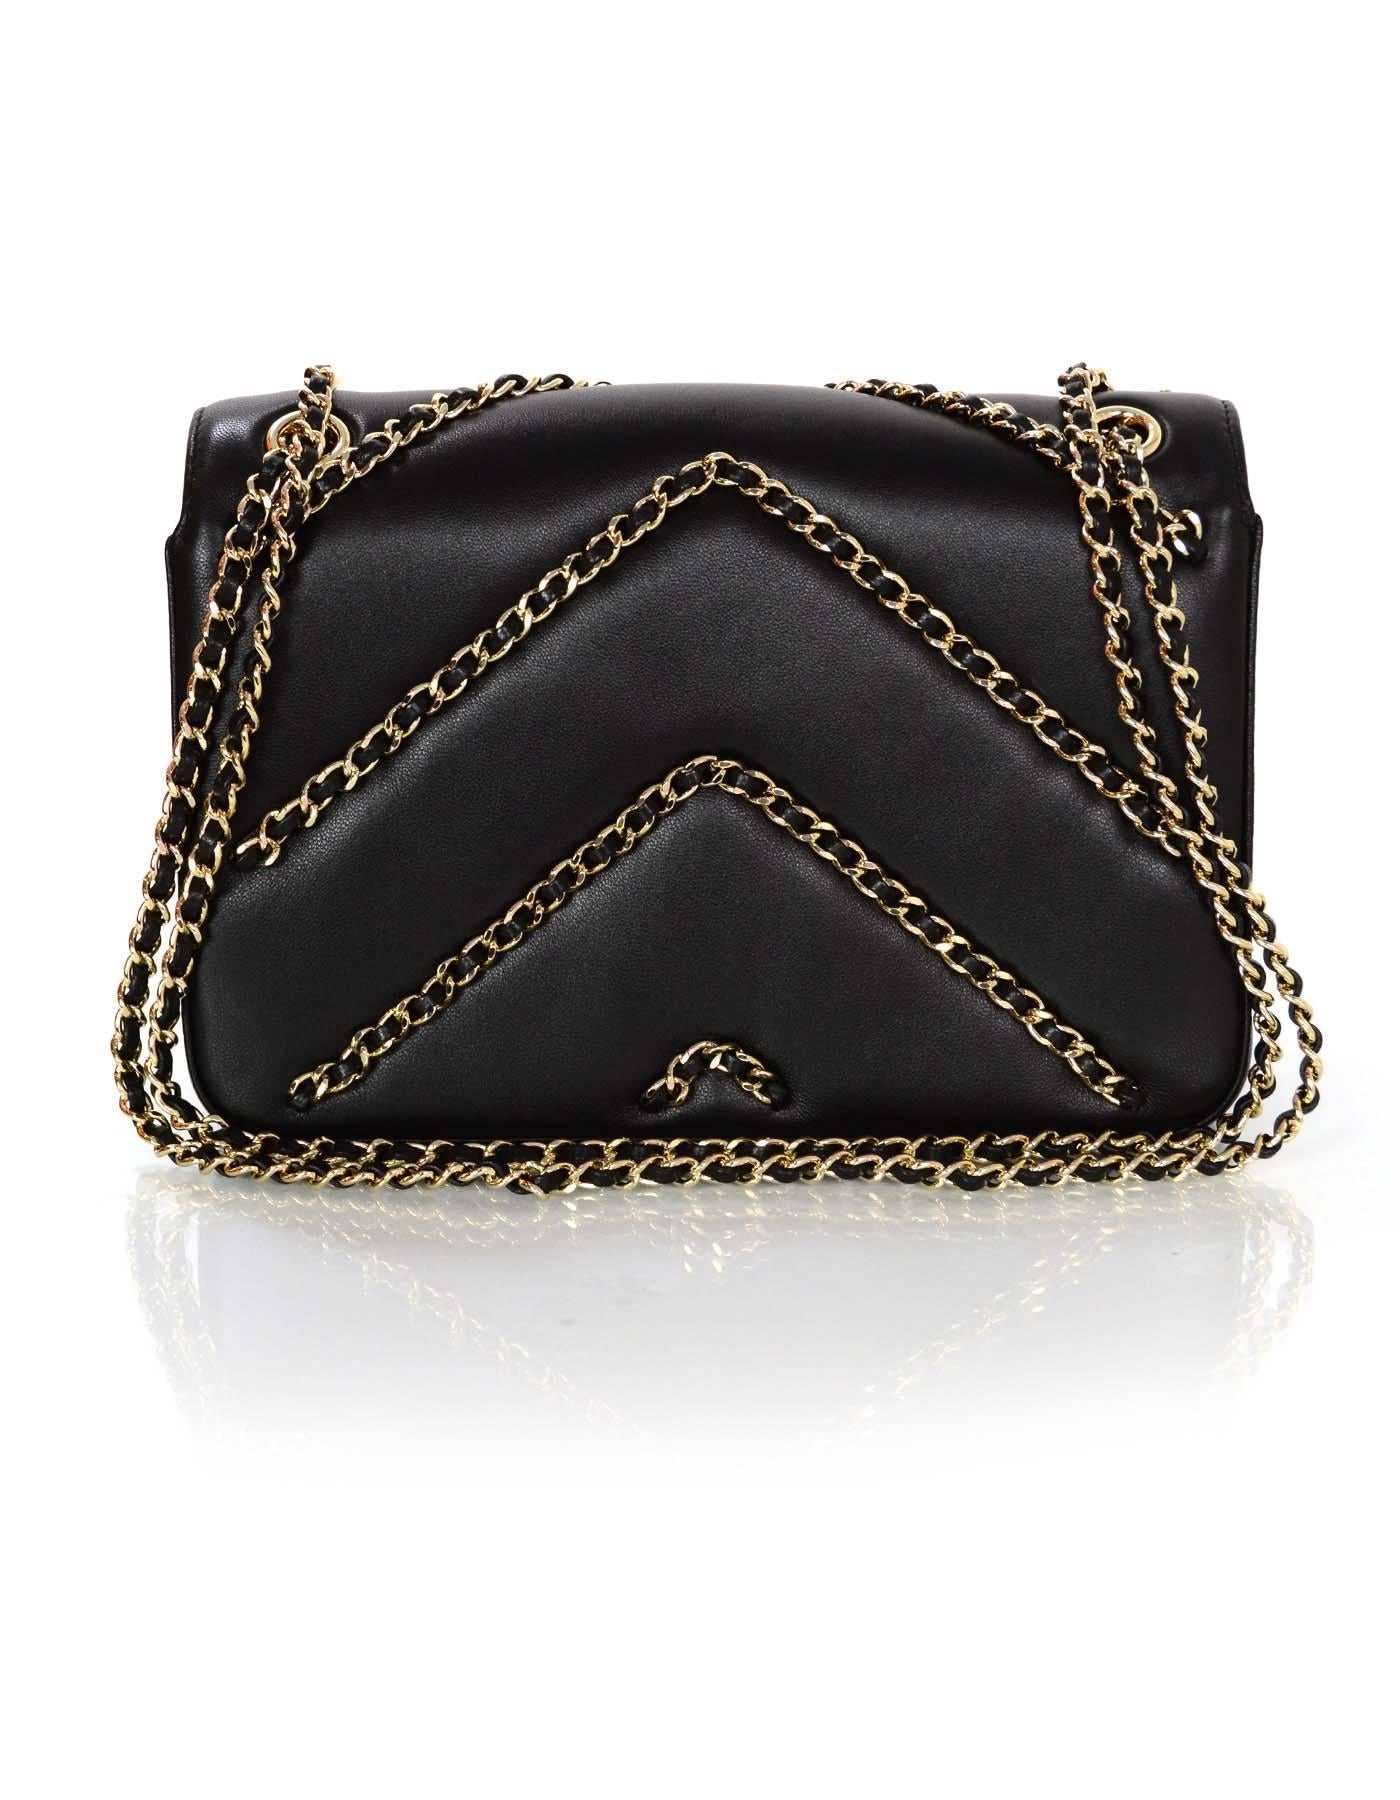 Chanel NEW Black Chevron Chain Flap Bag
Features black leather woven chain links throughout front and back for Chevron effect

Made In: Italy
Year of Production: 2016
Color: Black
Hardware: Pale goldtone
Materials: Leather and metal
Lining: